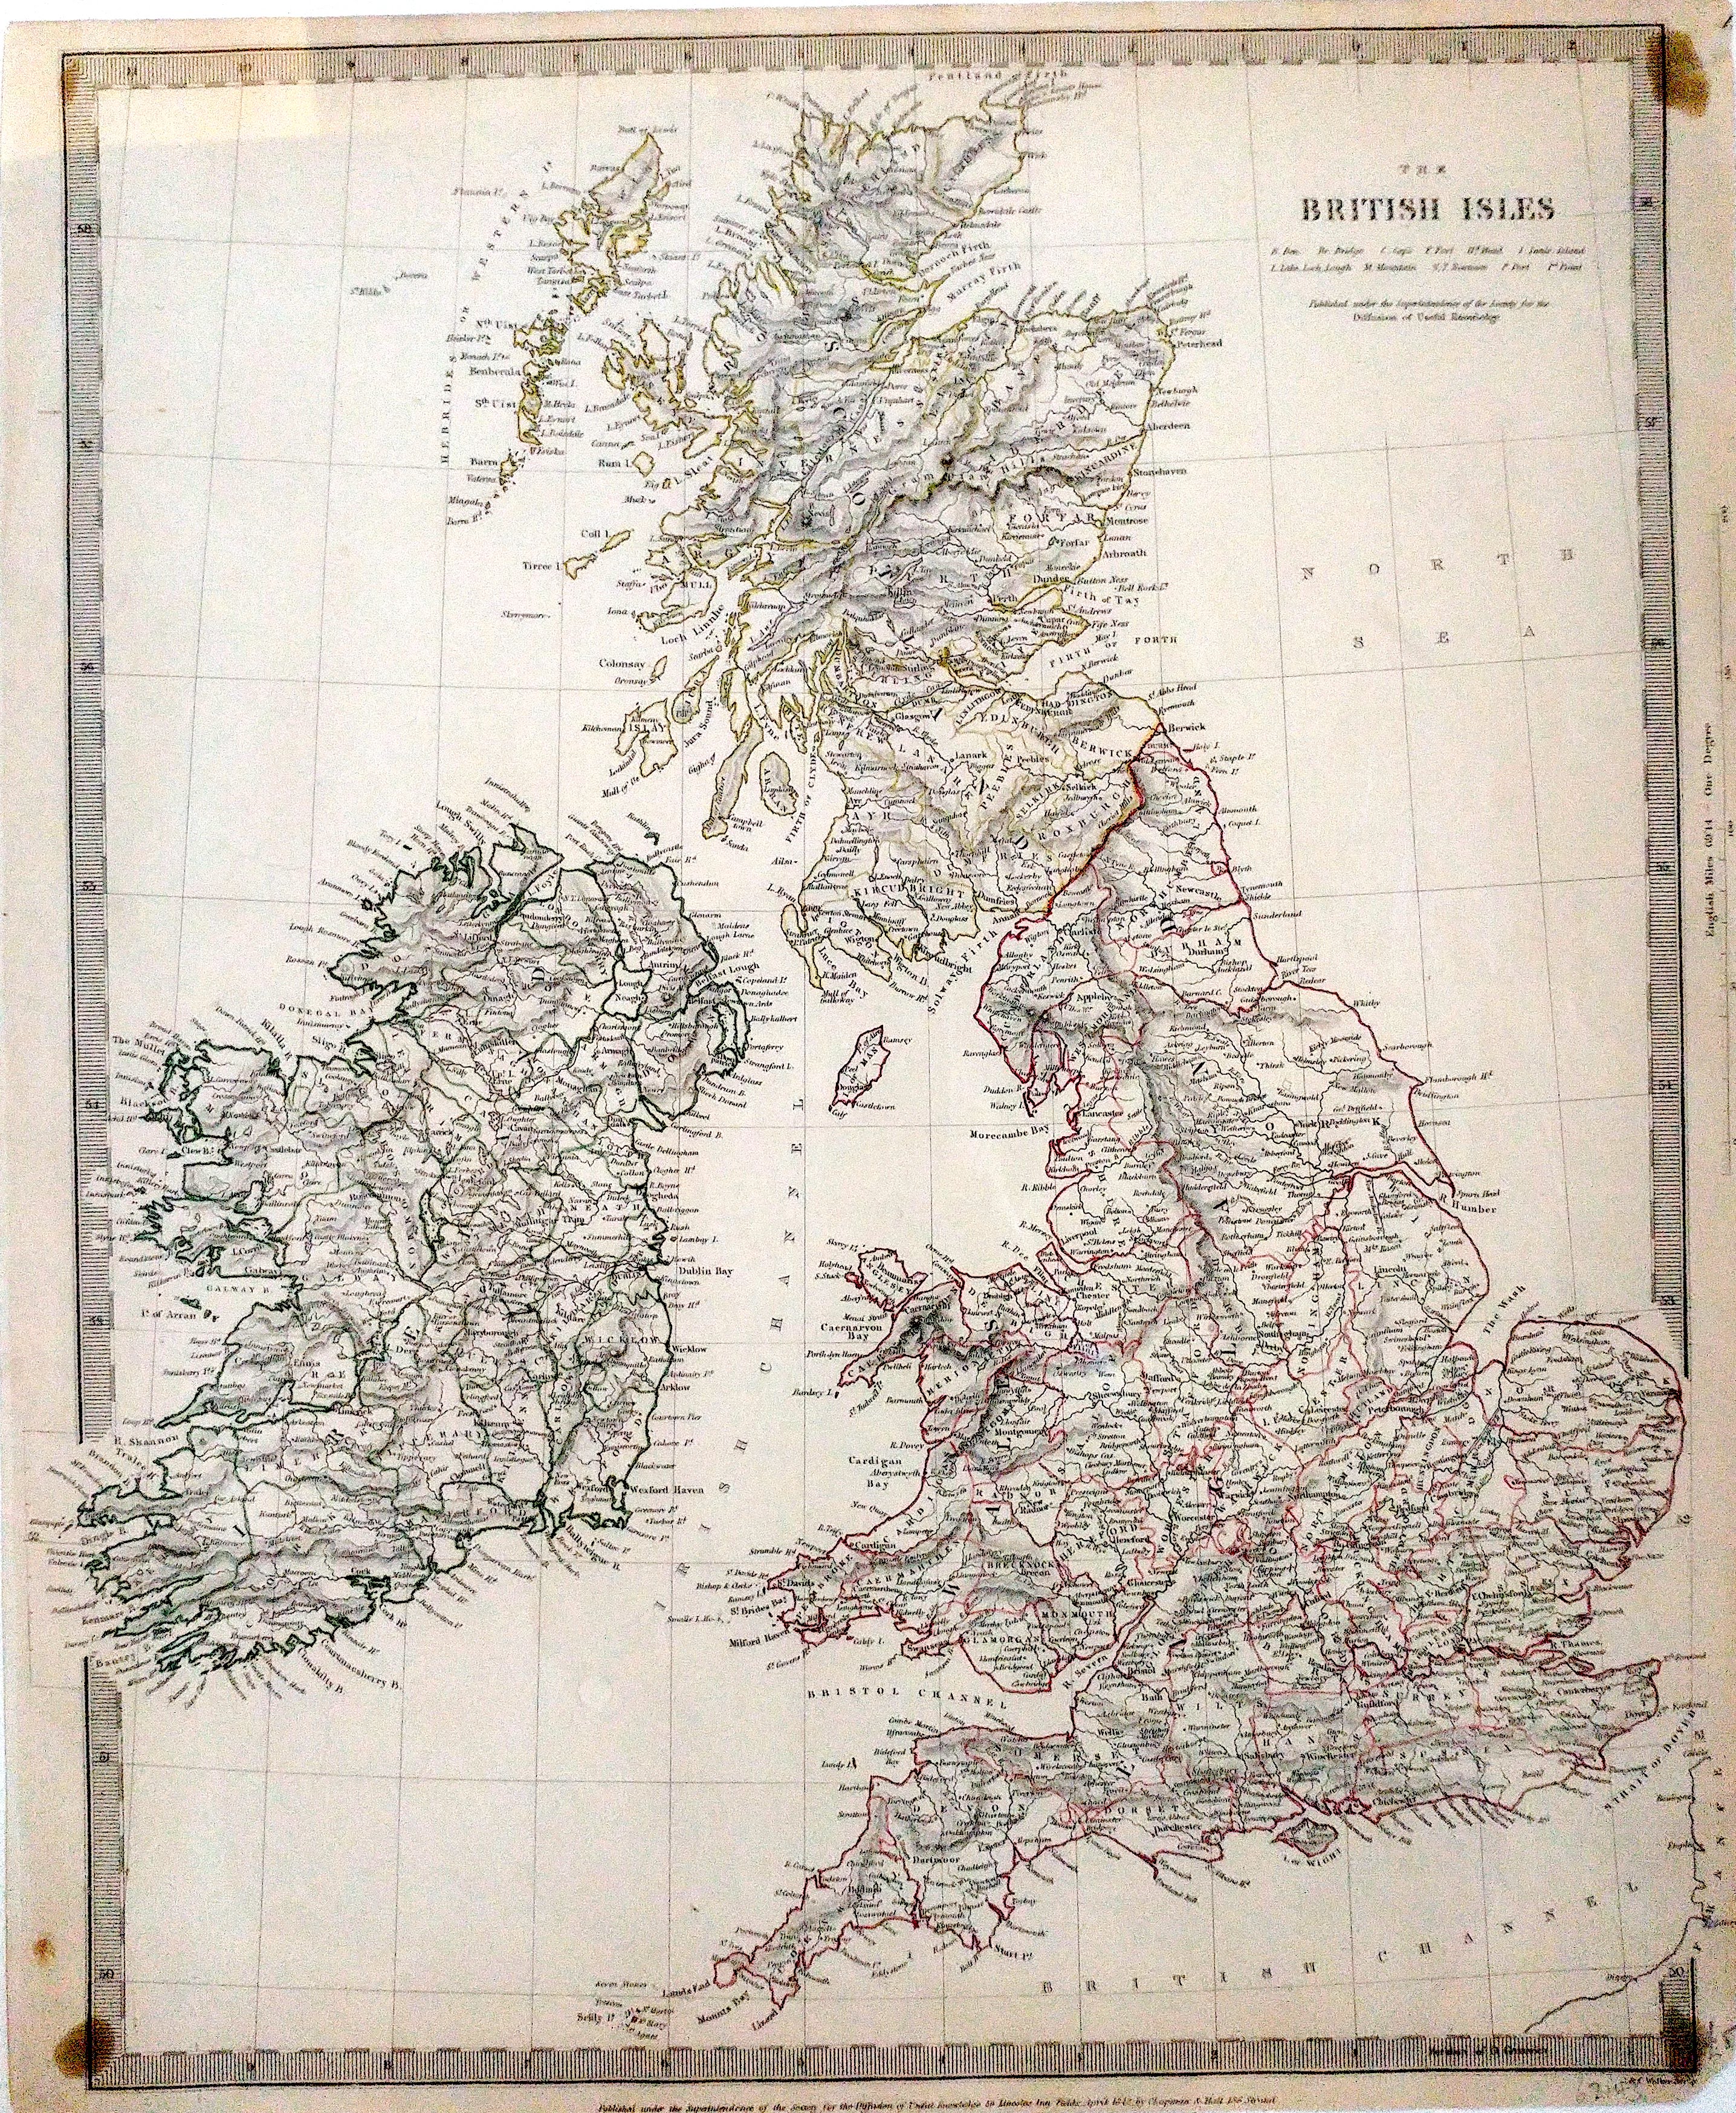 'The British Isles', Published by SDUK, 1842